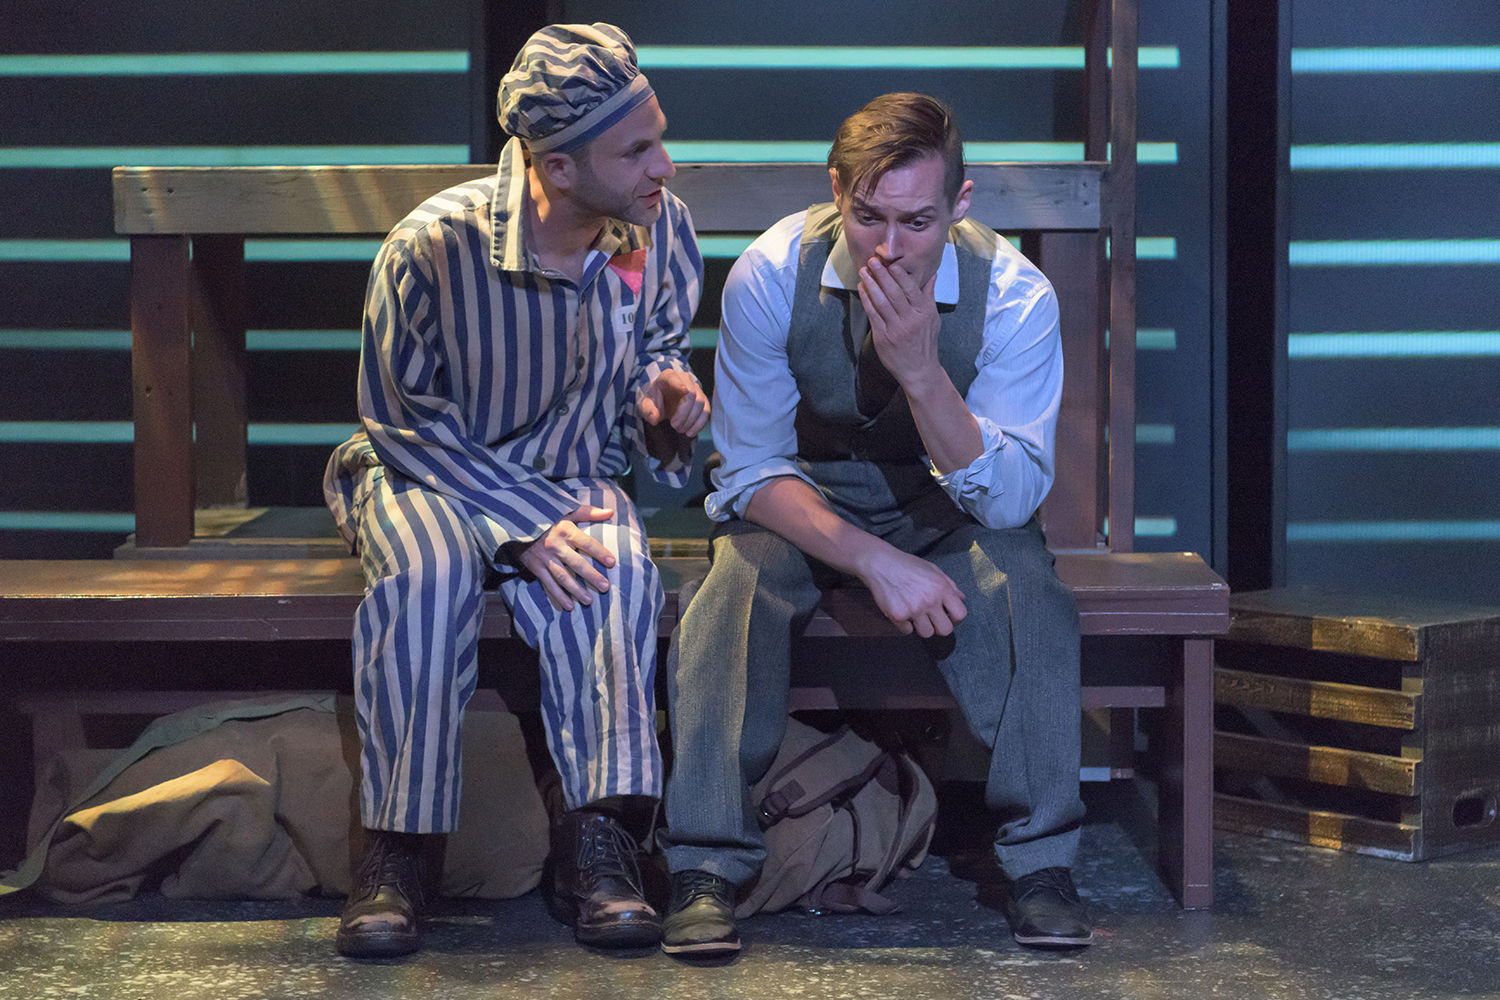 Andrew Gorell as Horst (left) and Geoff Knox as Max. Photo / Andy Dudik